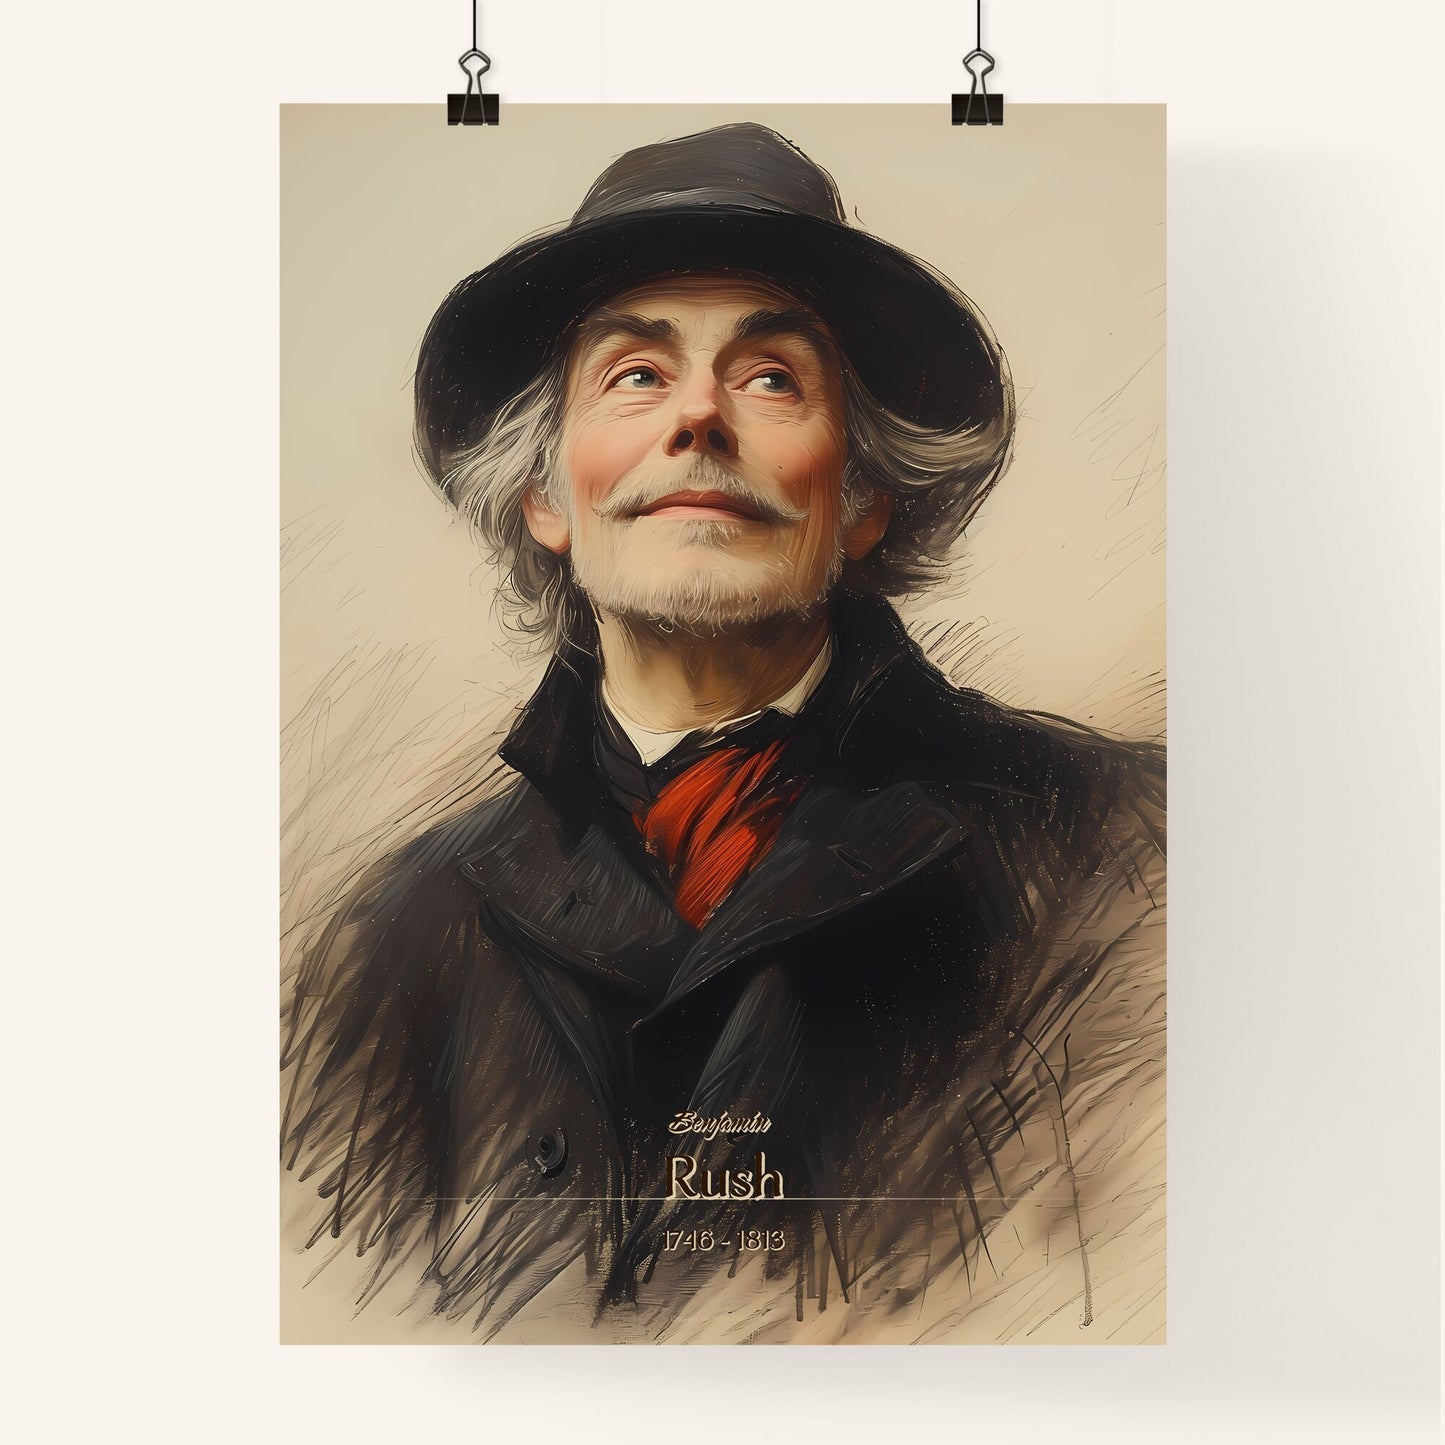 Benjamin, Rush, 1746 - 1813, A Poster of a man in a hat looking up Default Title